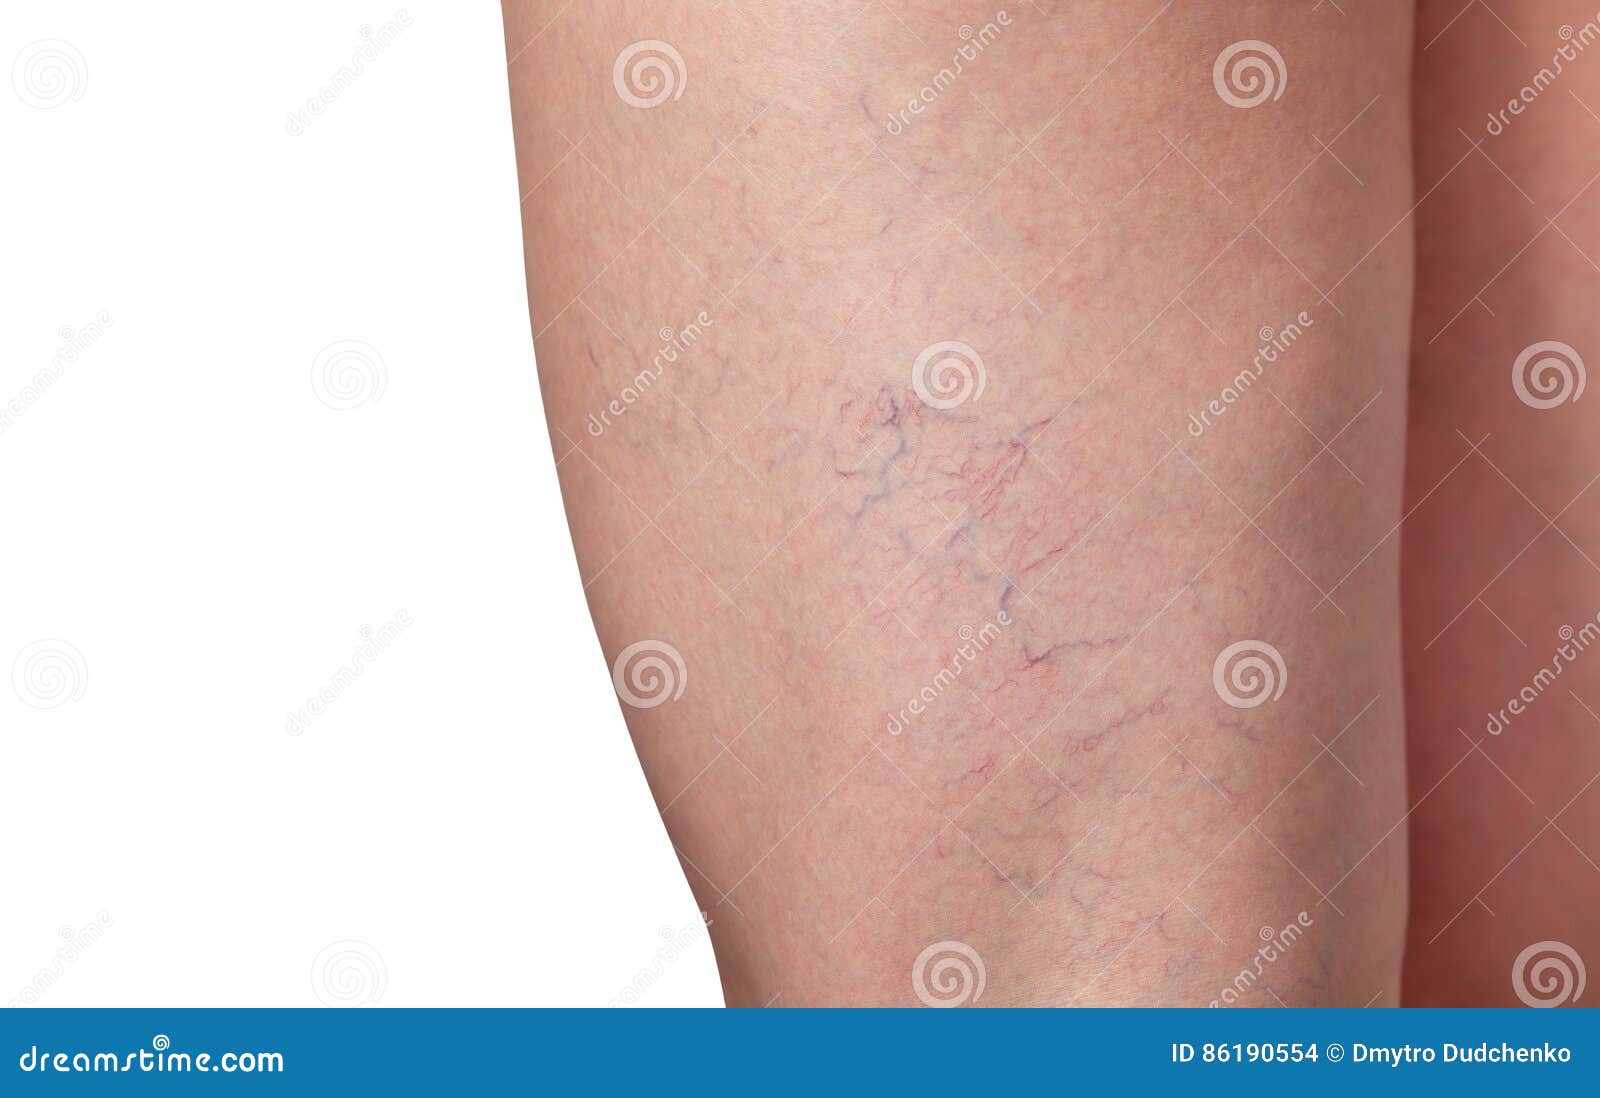 varicose veins and capillary veins in the legs.